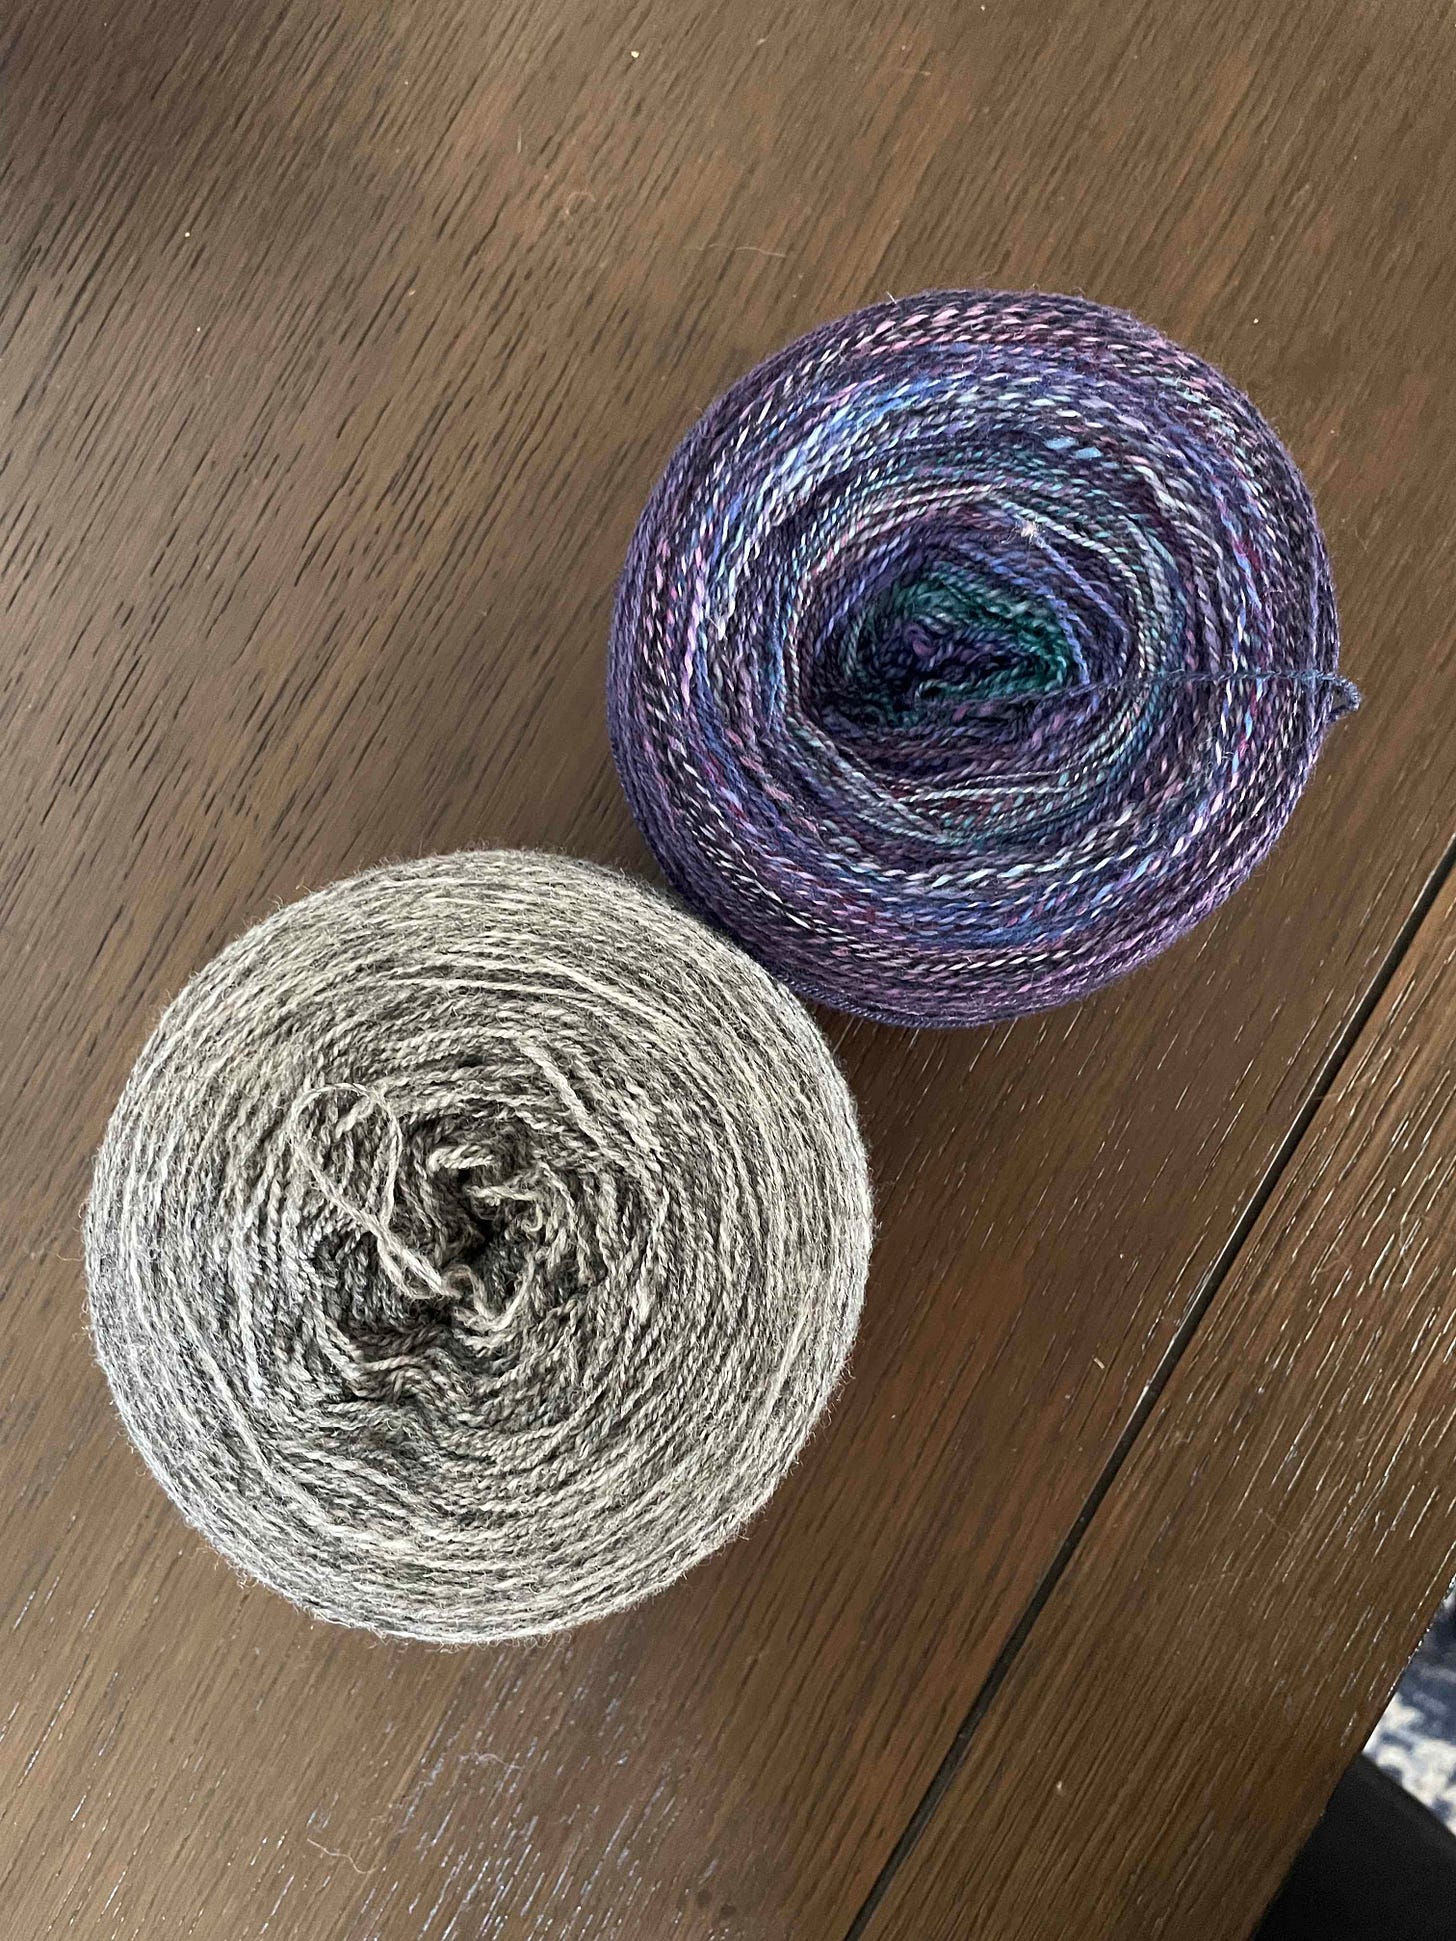 Two balls of yarn, one gray and one purple